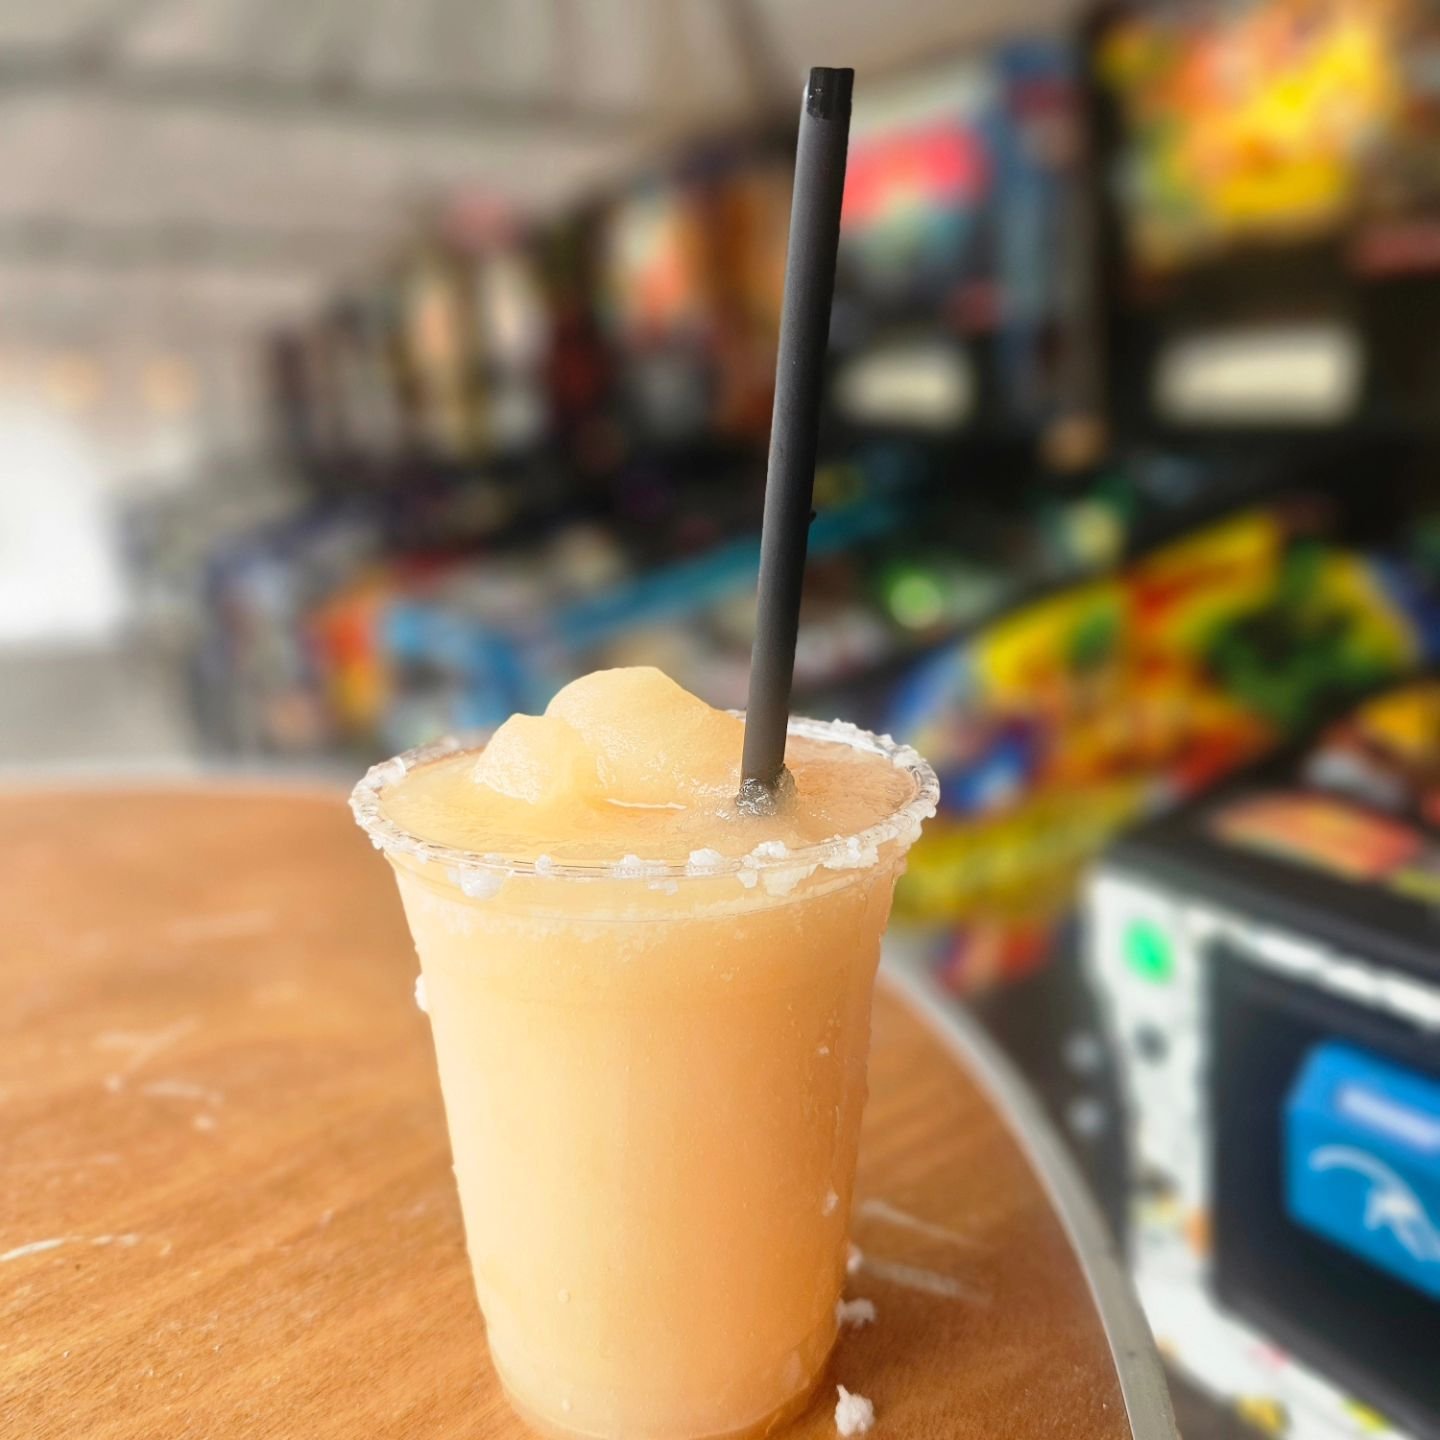 Day 2 of our Arcade Party has started. The Slushee today is a Poloma plus @thebrickovenbus @quetalstreeteats and @angrylinecookmn are here!